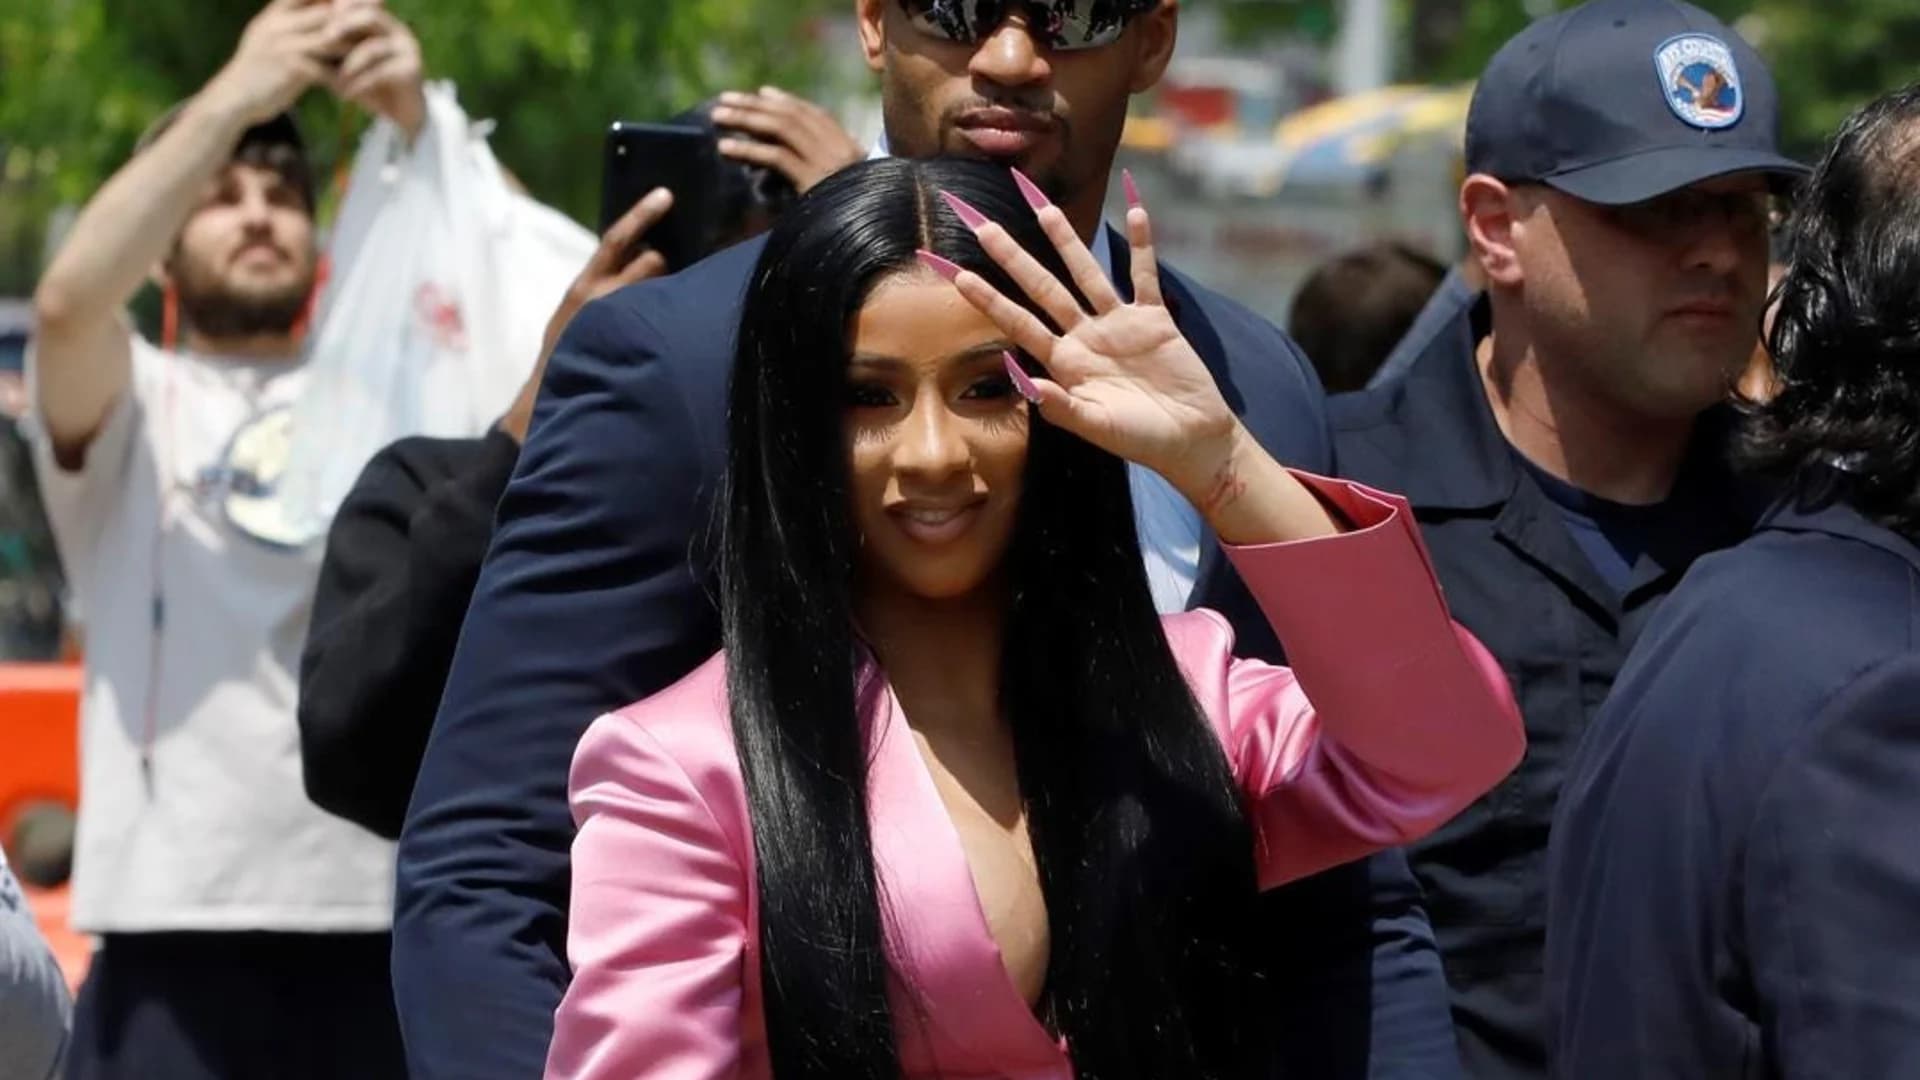 Cardi B indicted in case stemming from strip club fight